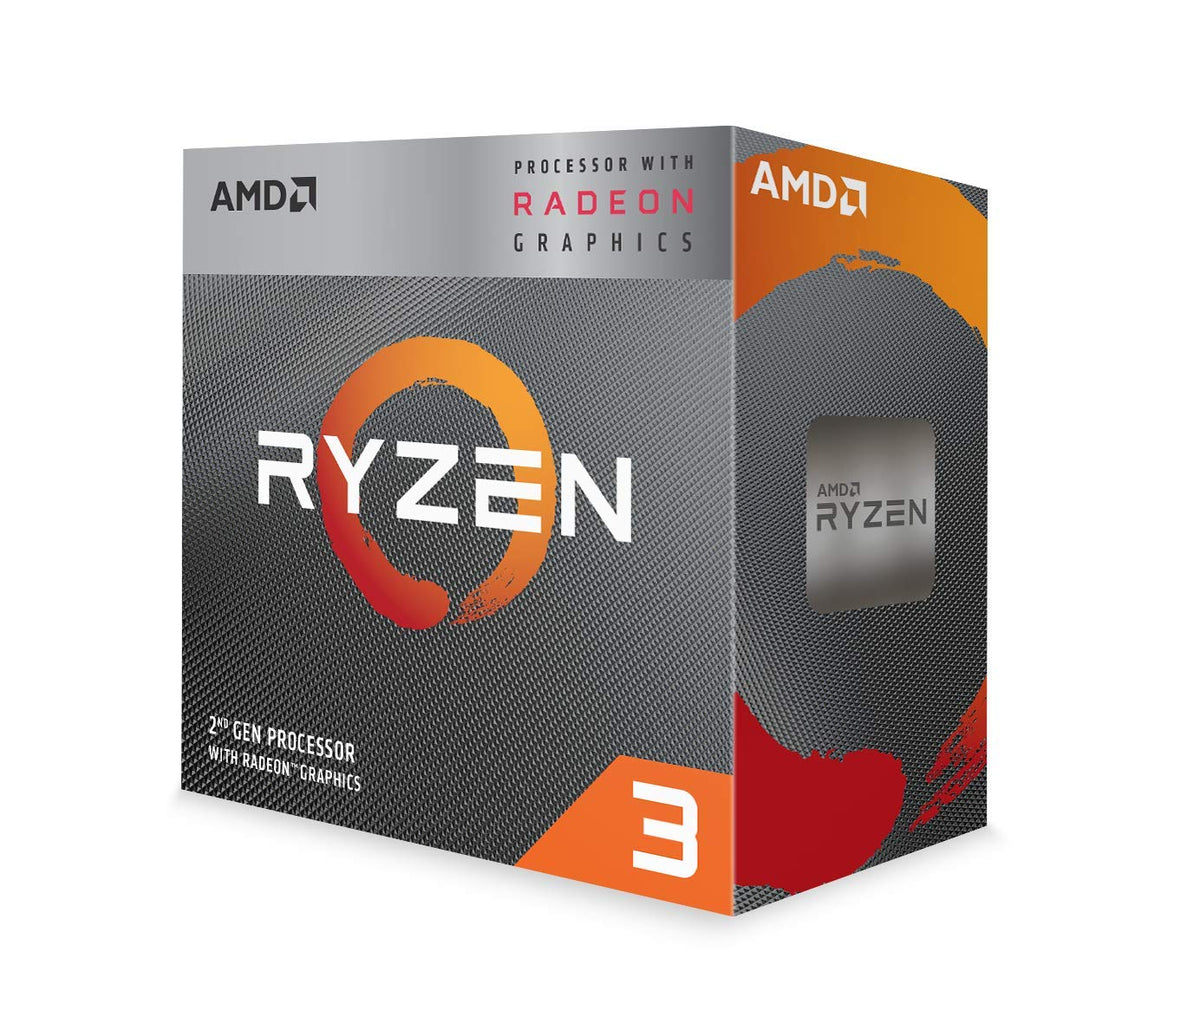 Gaming With The $99 Ryzen 3 3200G